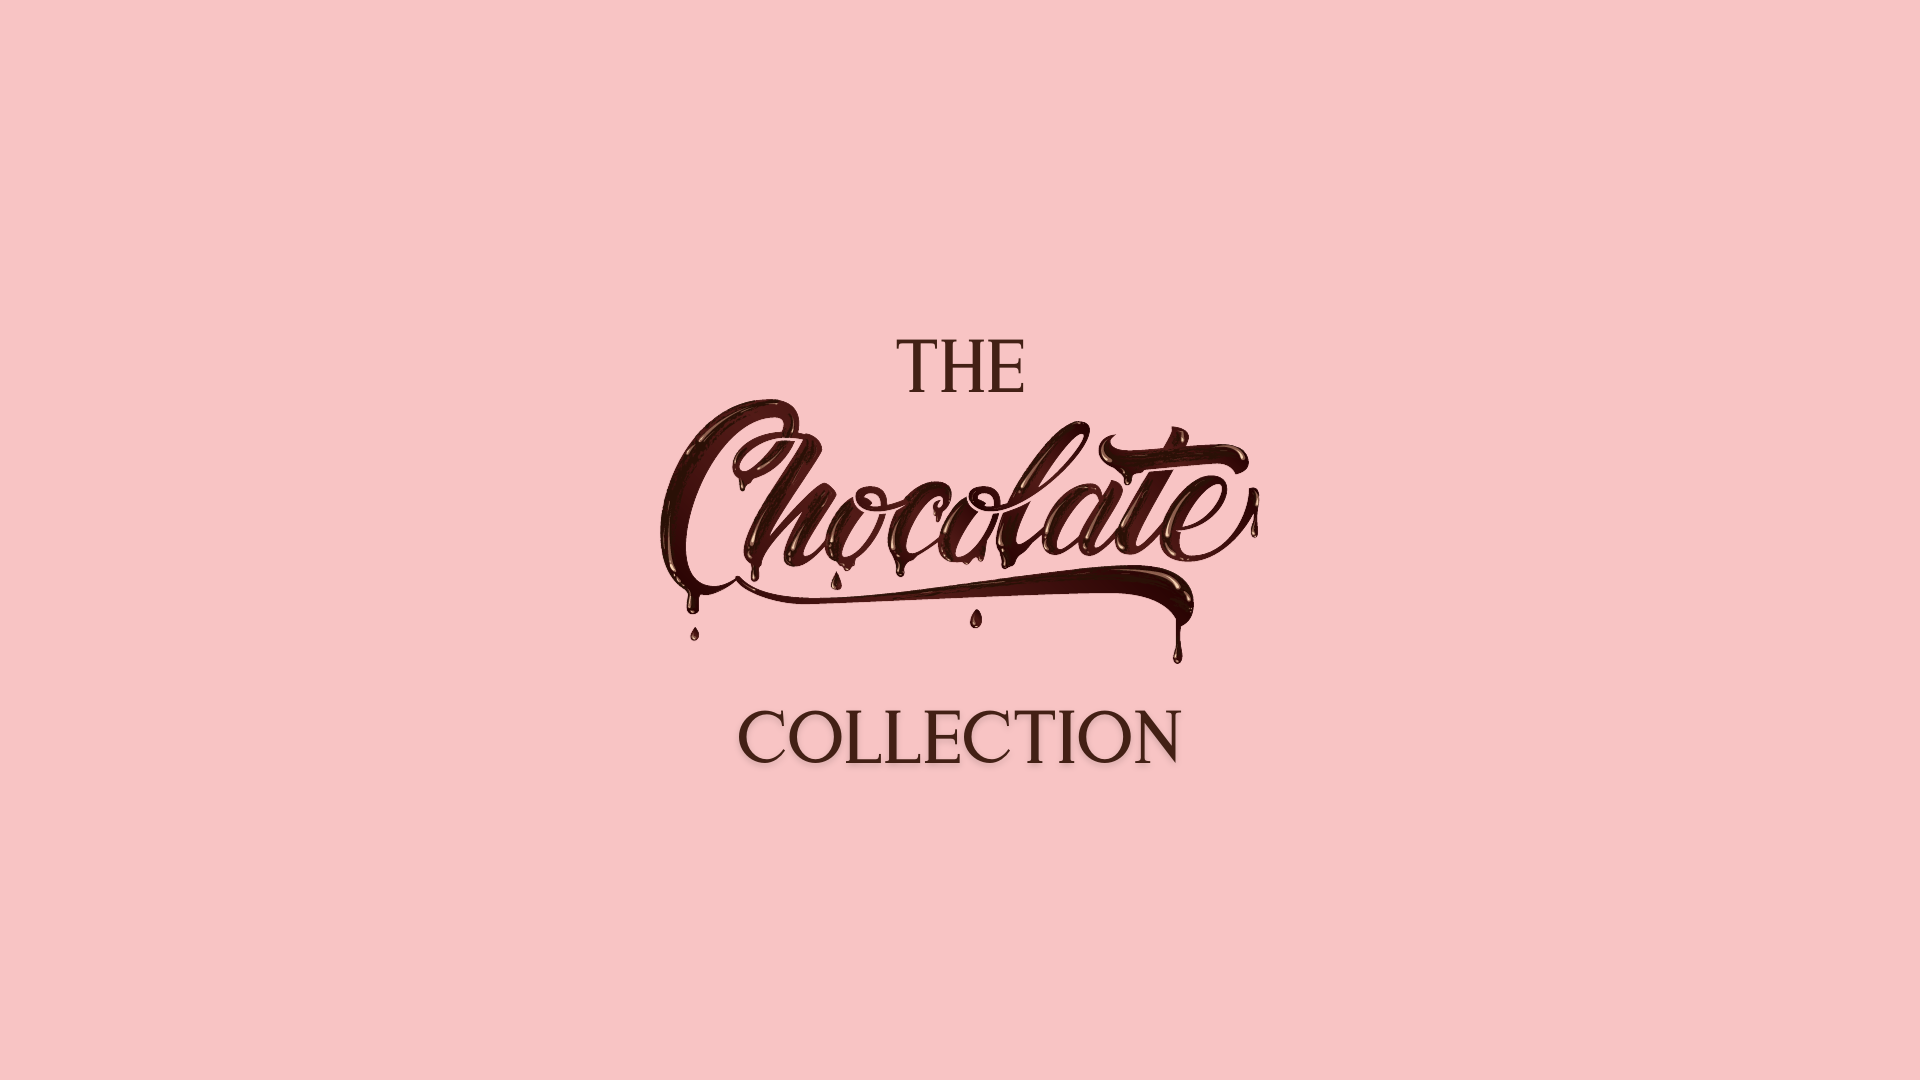 The Chocolate Collection